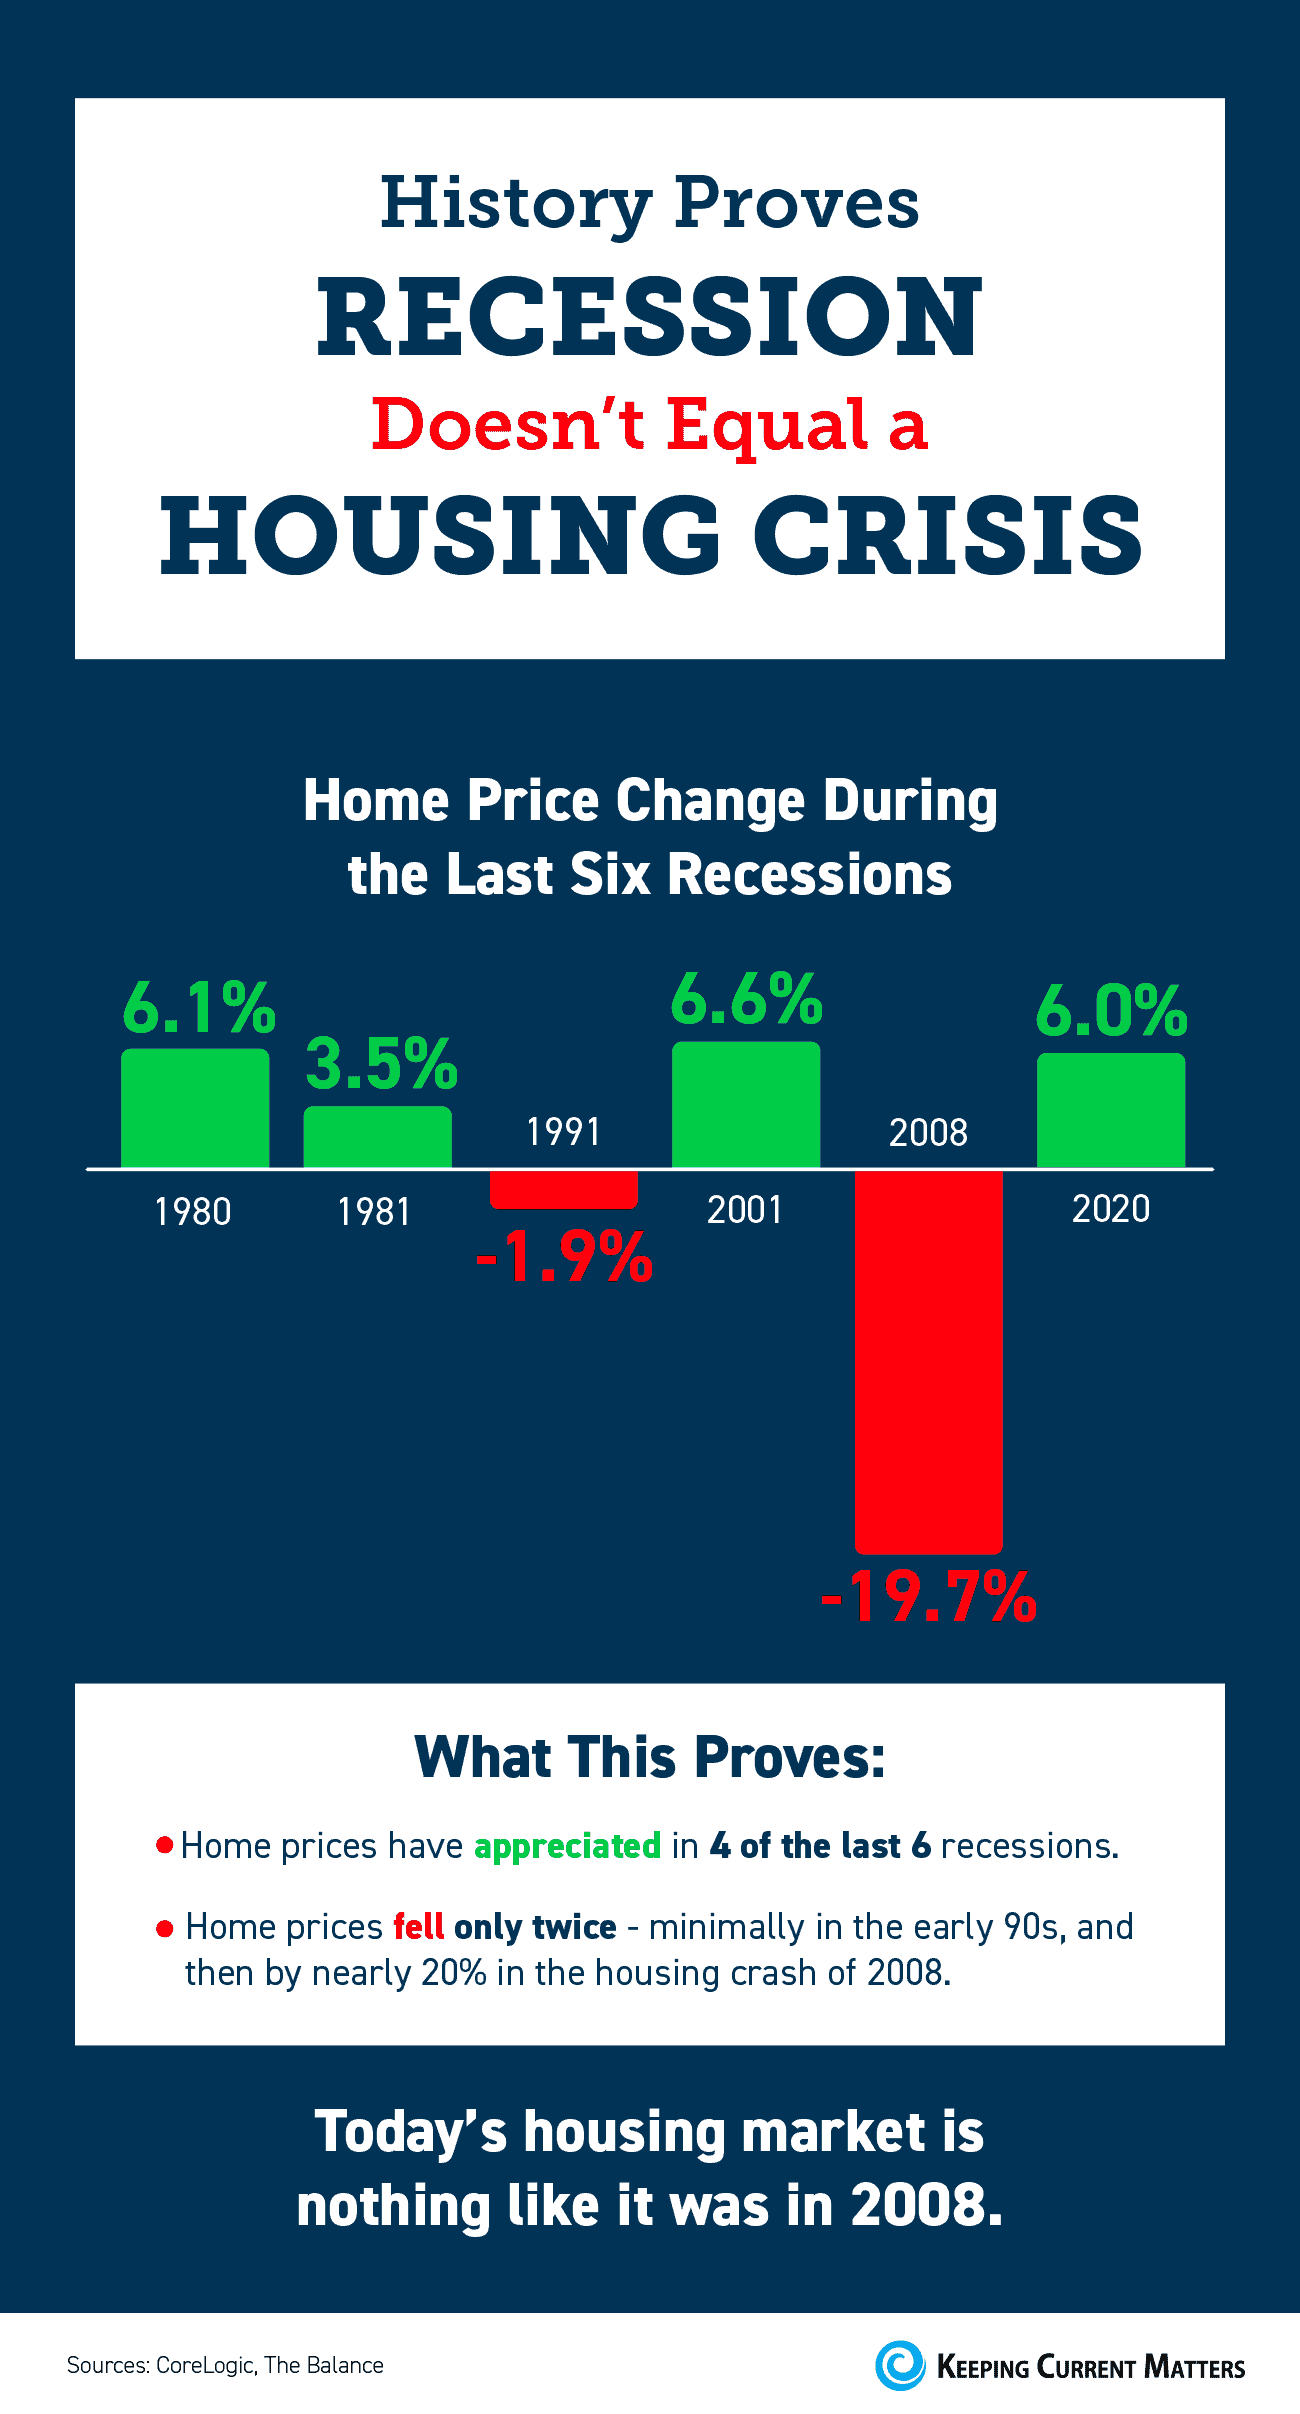 History Proves Recession Doesn’t Equal a Housing Crisis